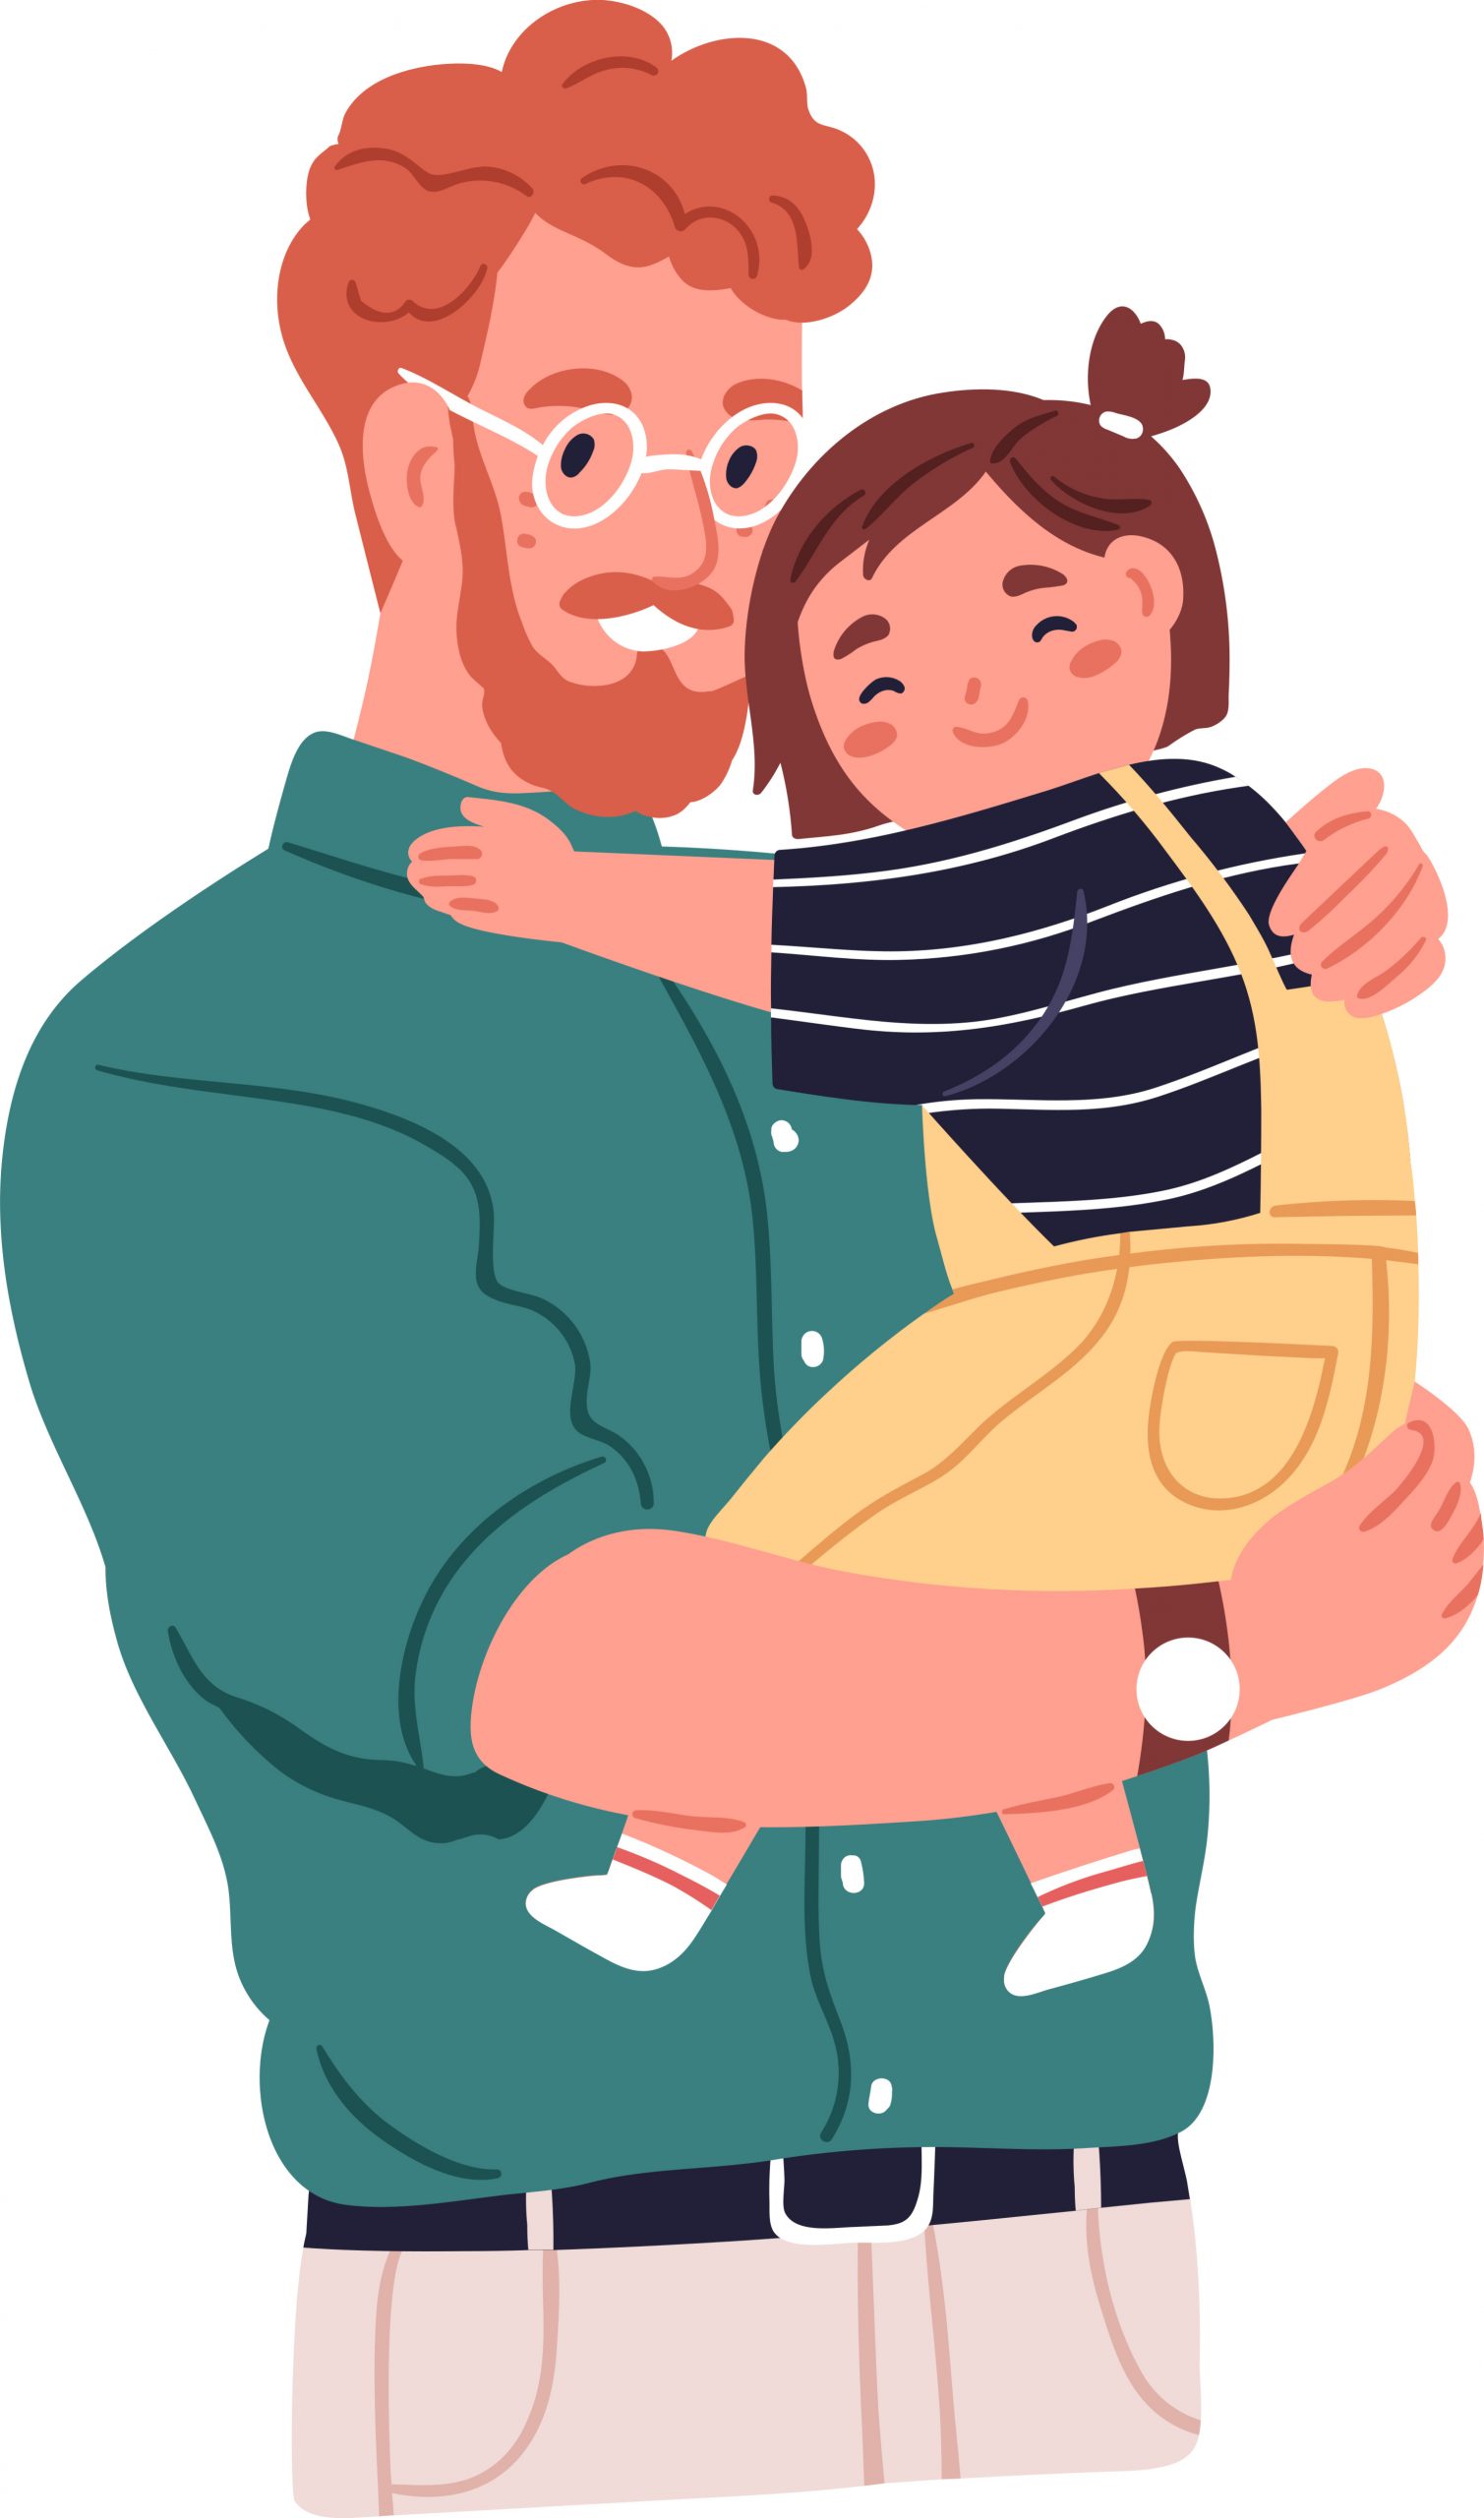 Father Holding Cute Daughter in his Arms Illustration